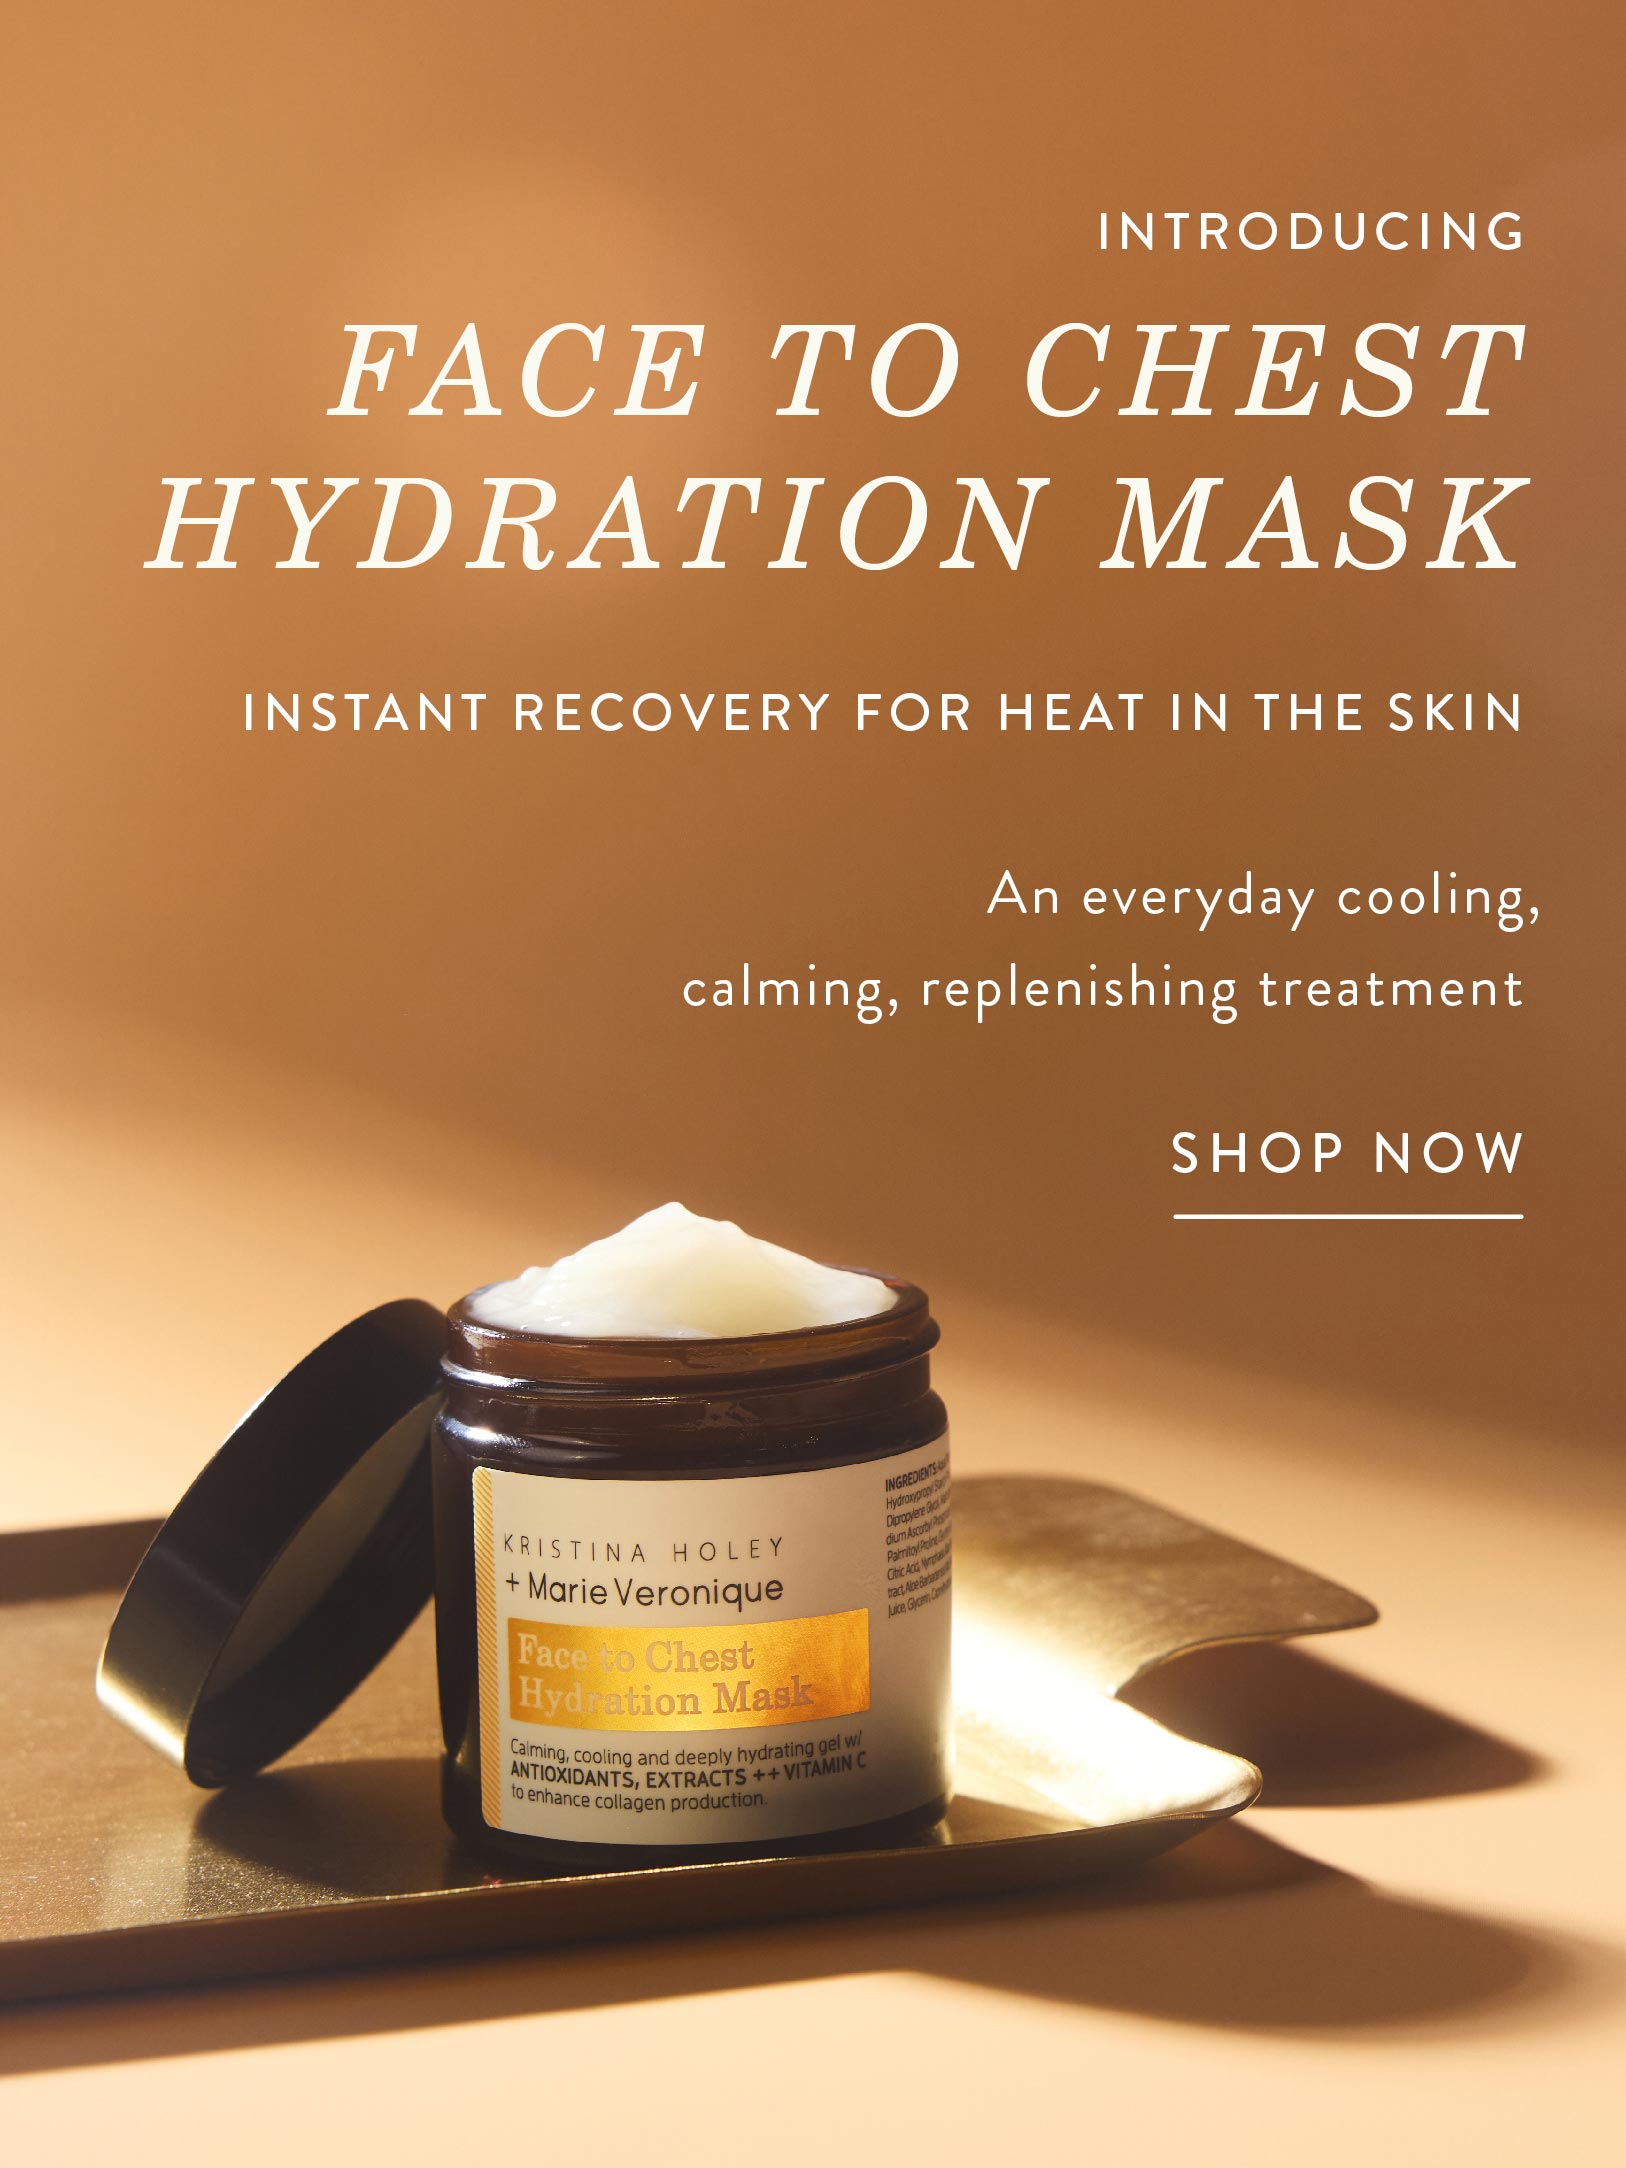 Introducing Face to Chest Hydration Mask - Instant Recovery for heat in the skin - An everyday cooling, calming, replenishment treatment - Shop Now